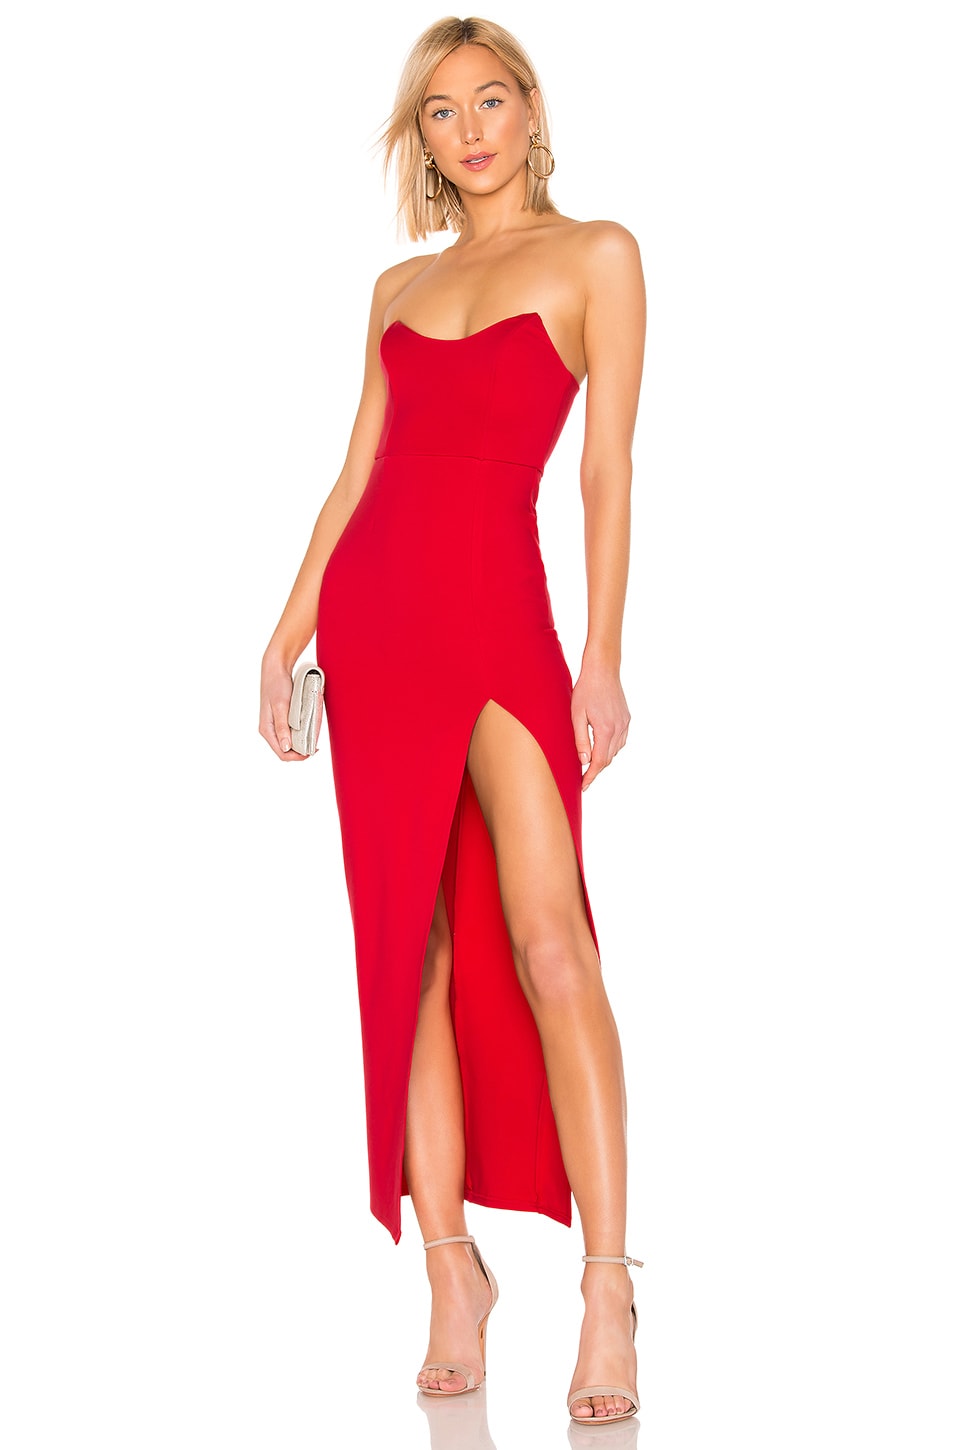 Mitzie Dress in Red. Revolve Women Clothing Dresses Maxi Dresses 